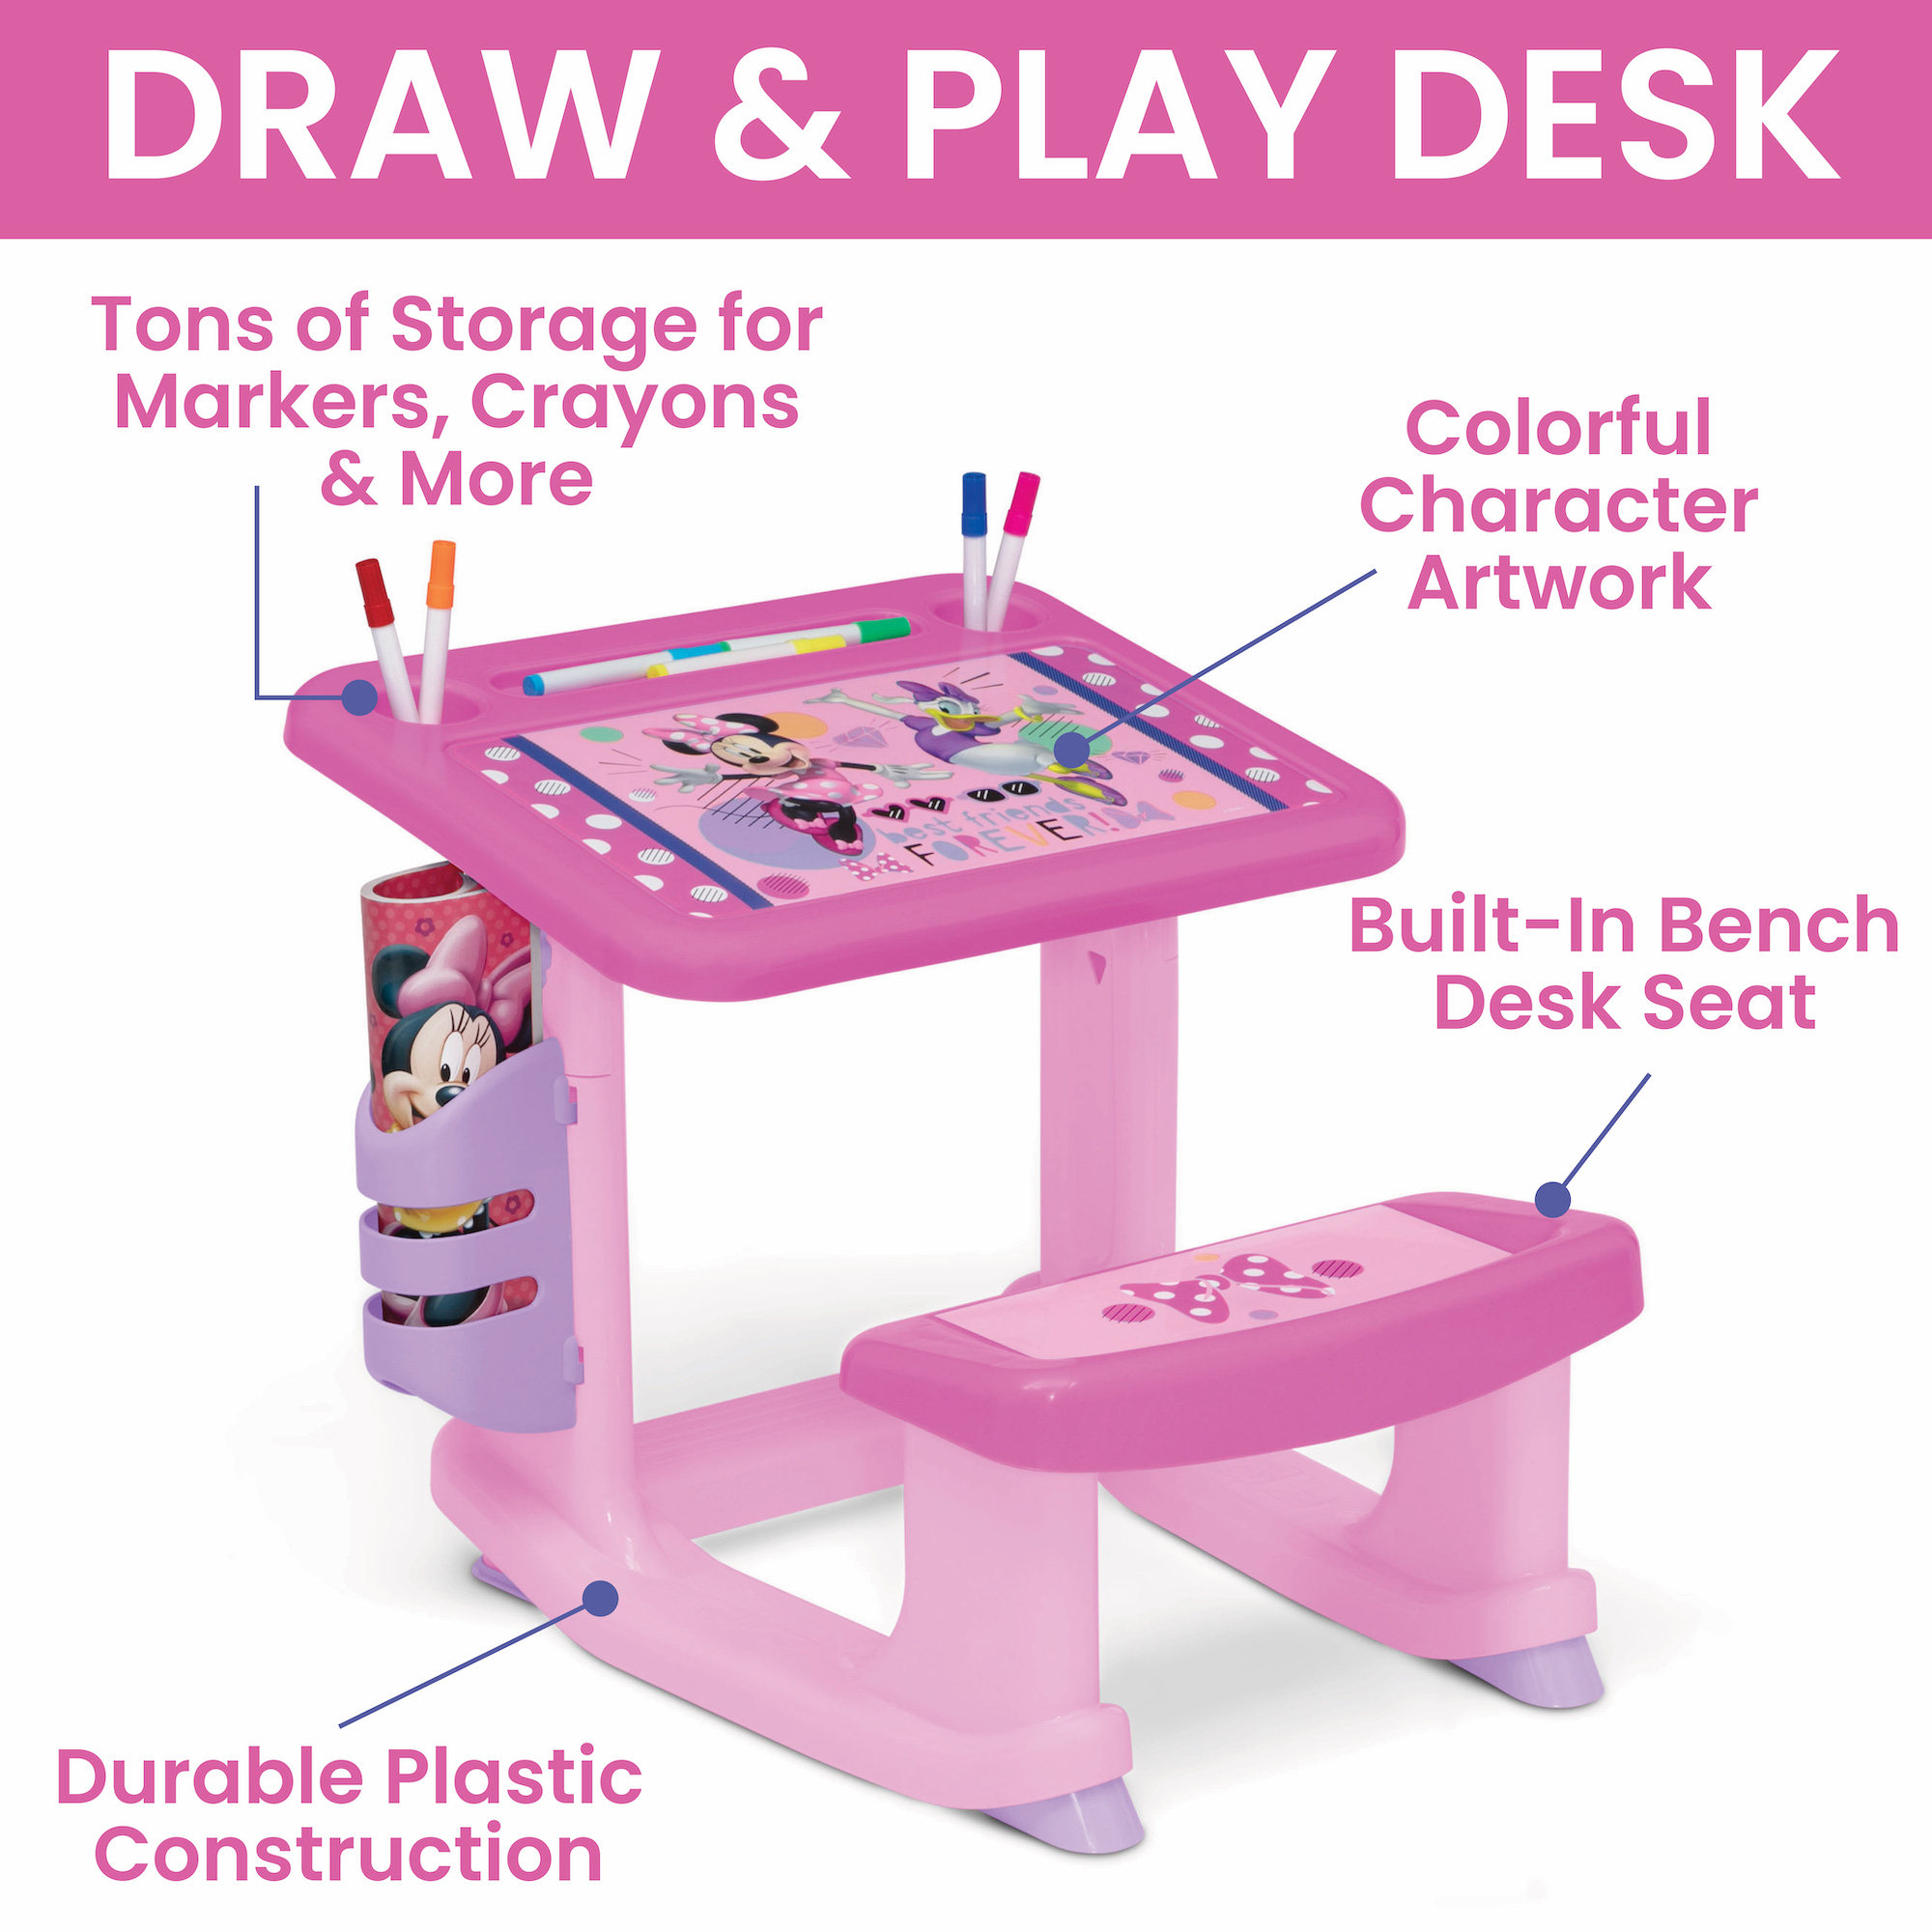 Minnie Mouse 3-Piece Art & Play Toddler Room-in-a-Box by Delta Children – Includes Draw & Play Desk, Art & Storage Station & Fabric Toy Box, Pink - image 4 of 11